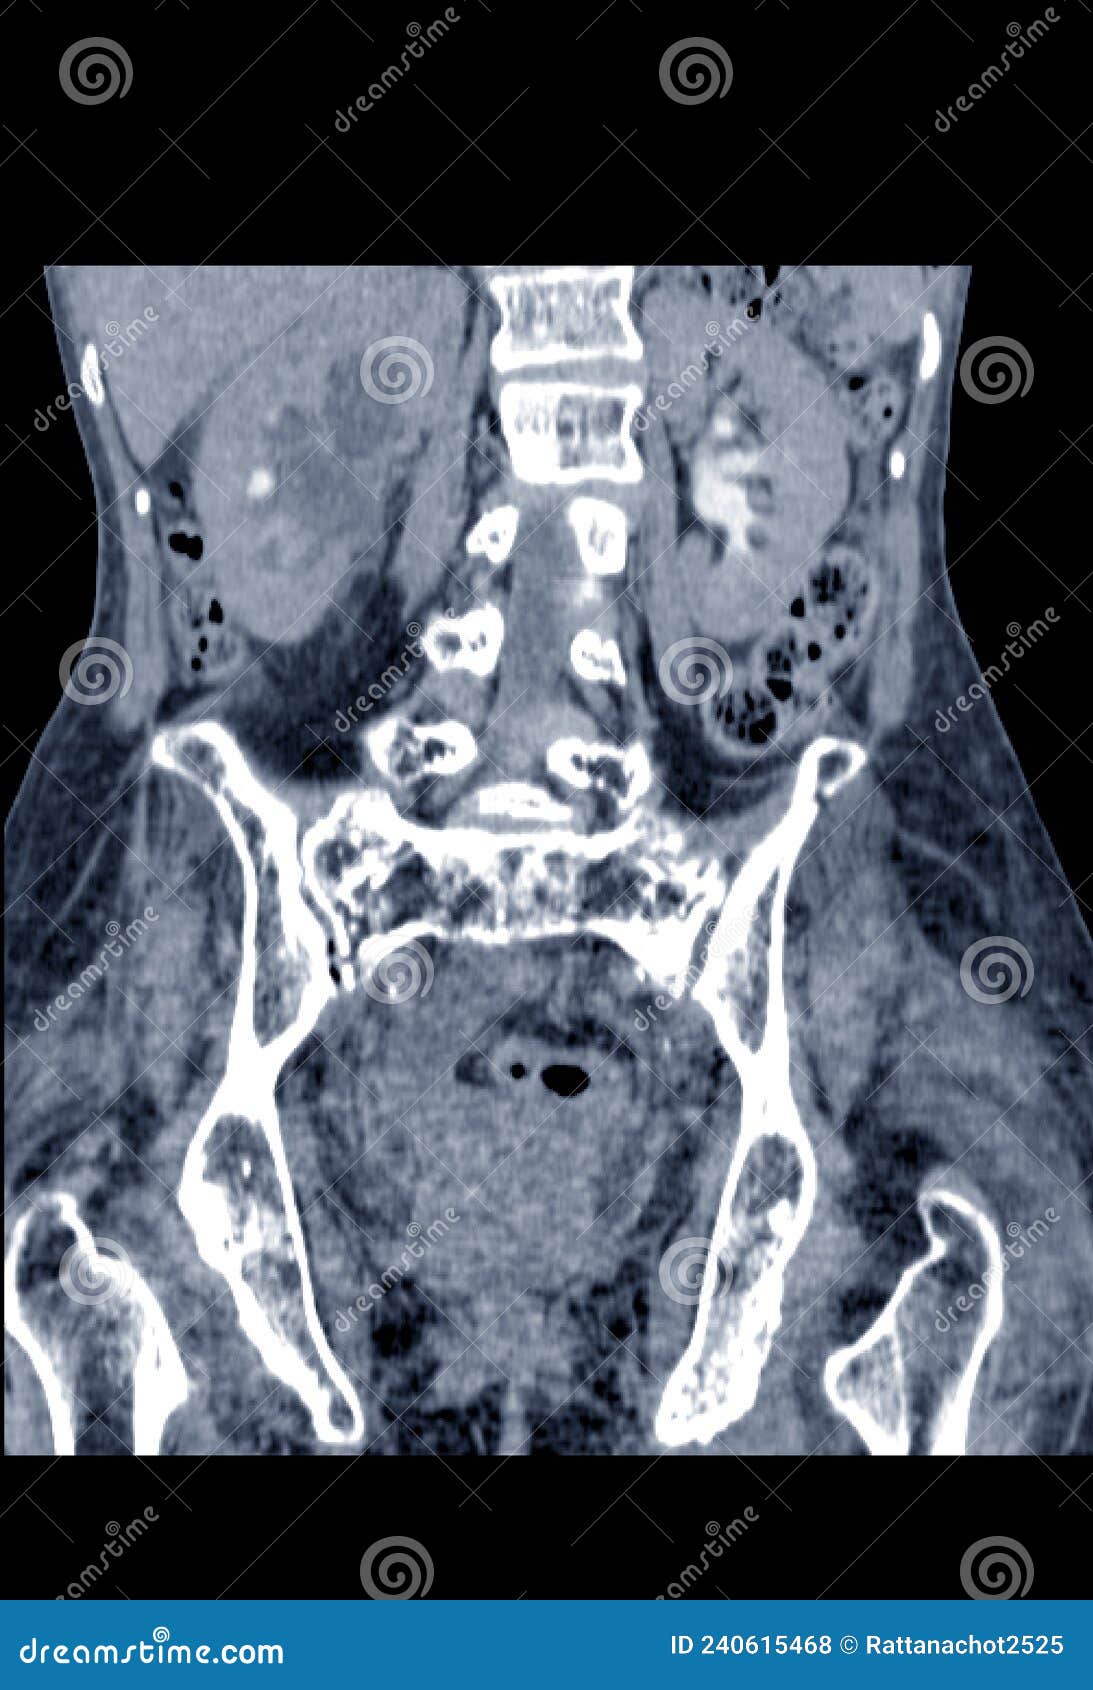 Ct Scan Lower Abdomen Severe Hydronephrosis Rt Kidney With Distal